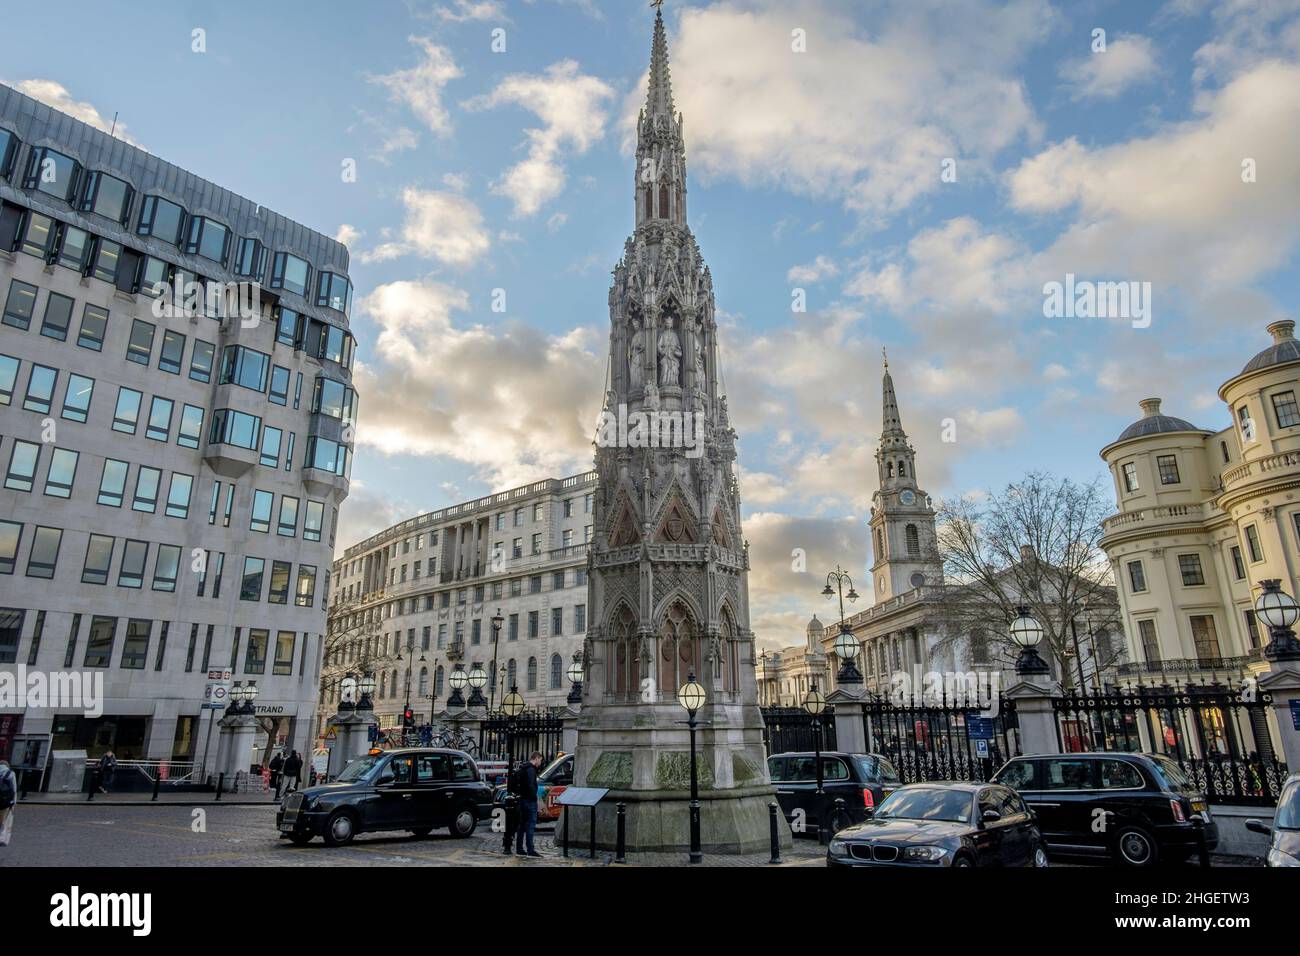 Charing Cross monument, a replica memorial to Queen Eleanor of Castille, wife of King Edward I of England, which originally stood nearby. London UK. Stock Photo